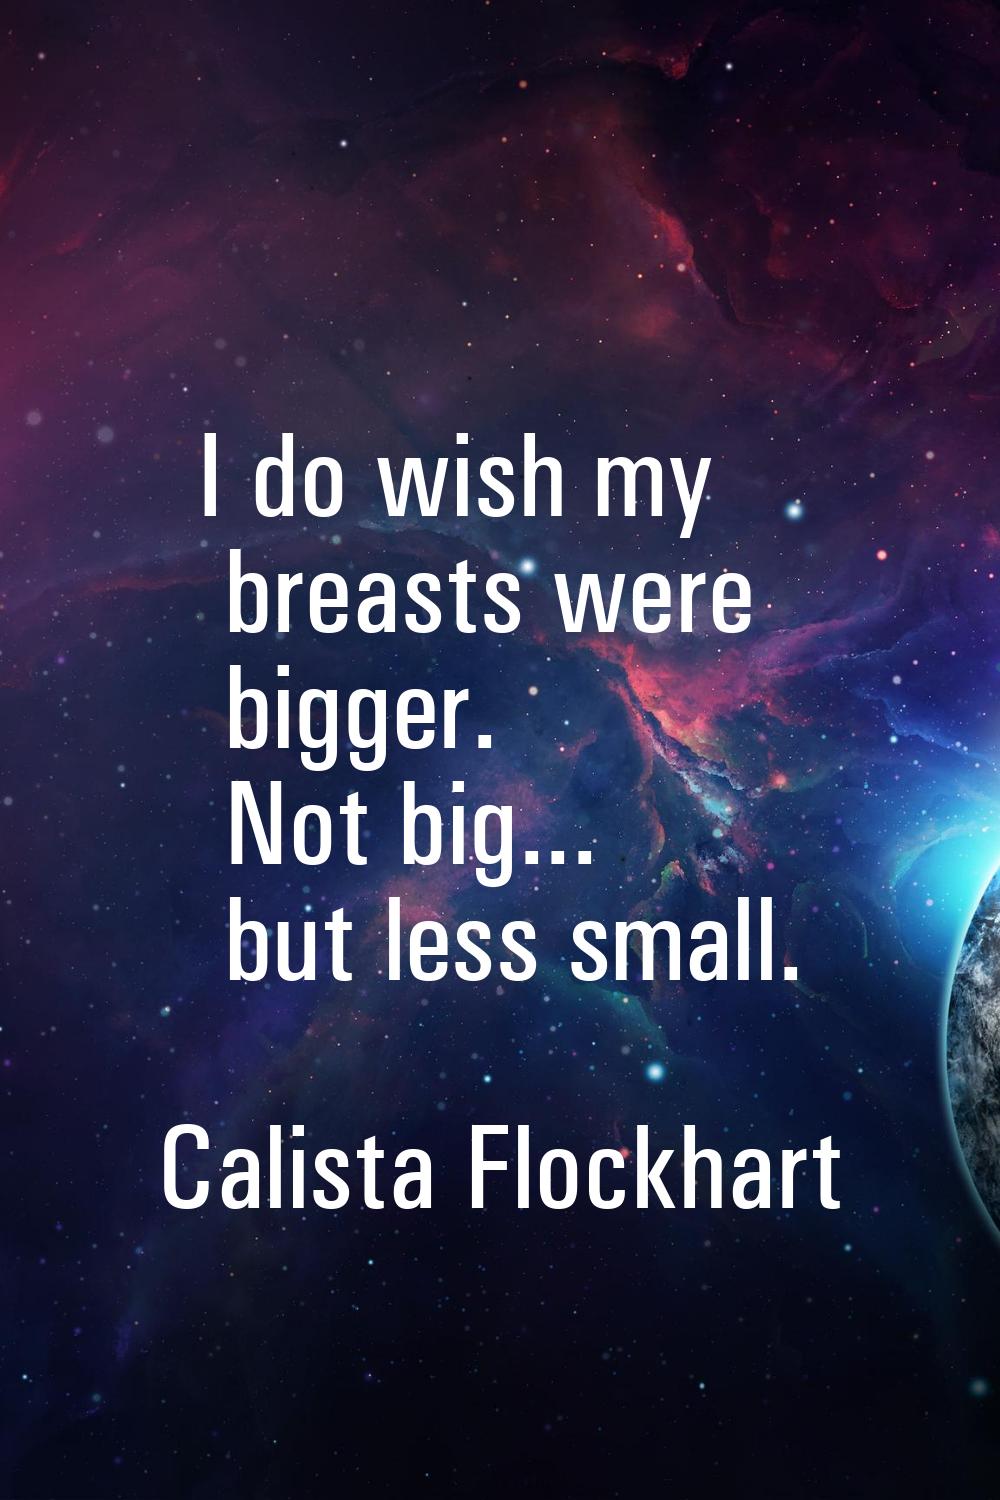 I do wish my breasts were bigger. Not big... but less small.